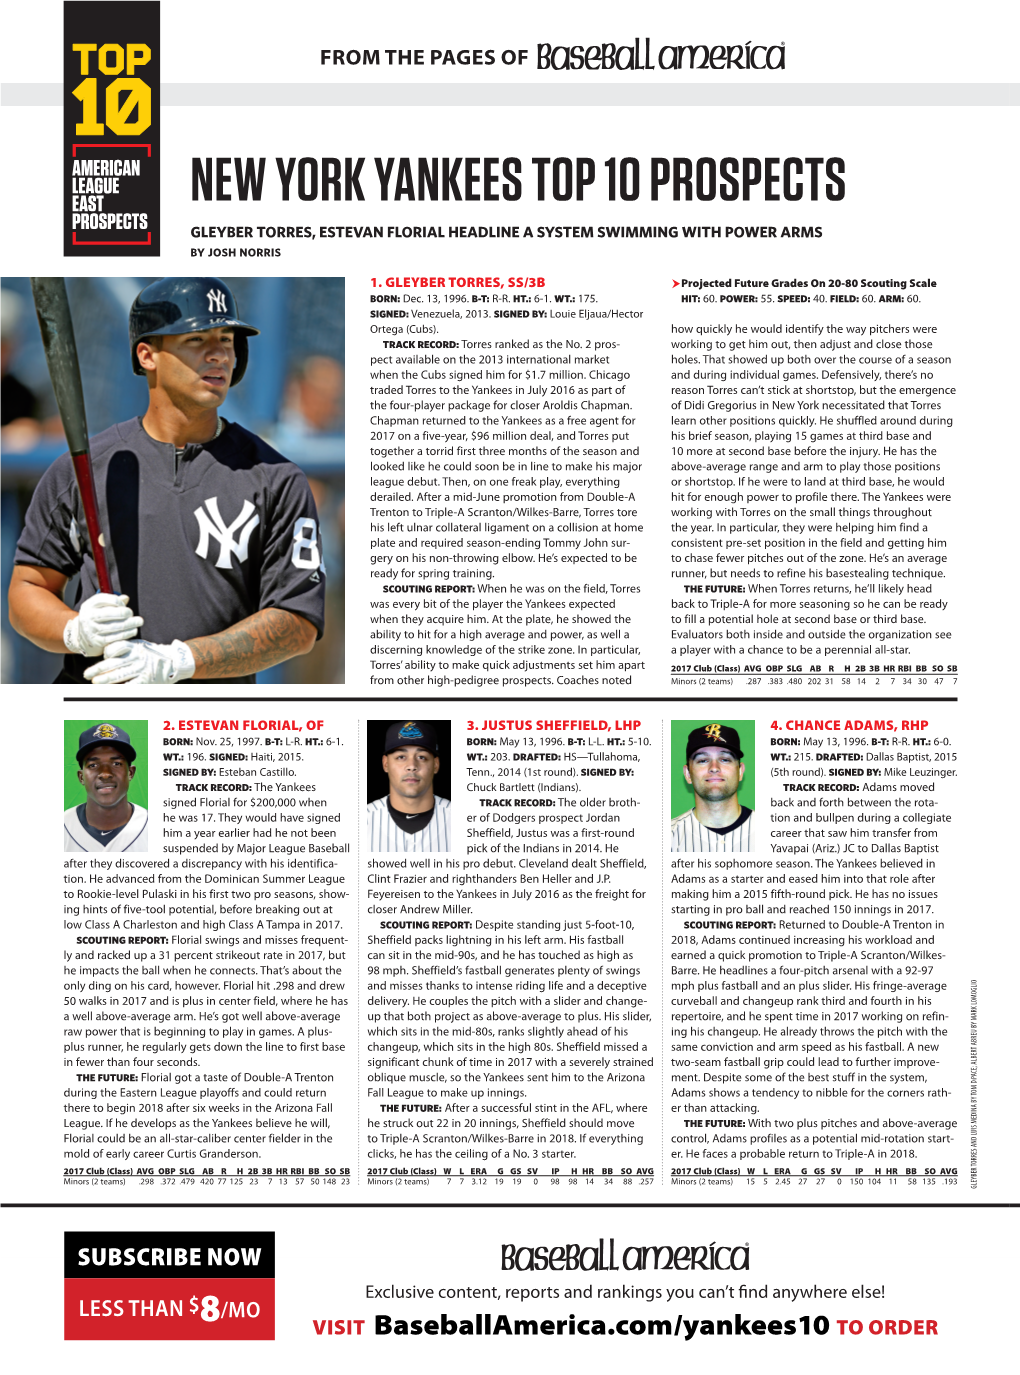 New York Yankees Top 10 Prospects Prospects Gleyber Torres, Estevan Florial Headline a System Swimming with Power Arms by Josh Norris